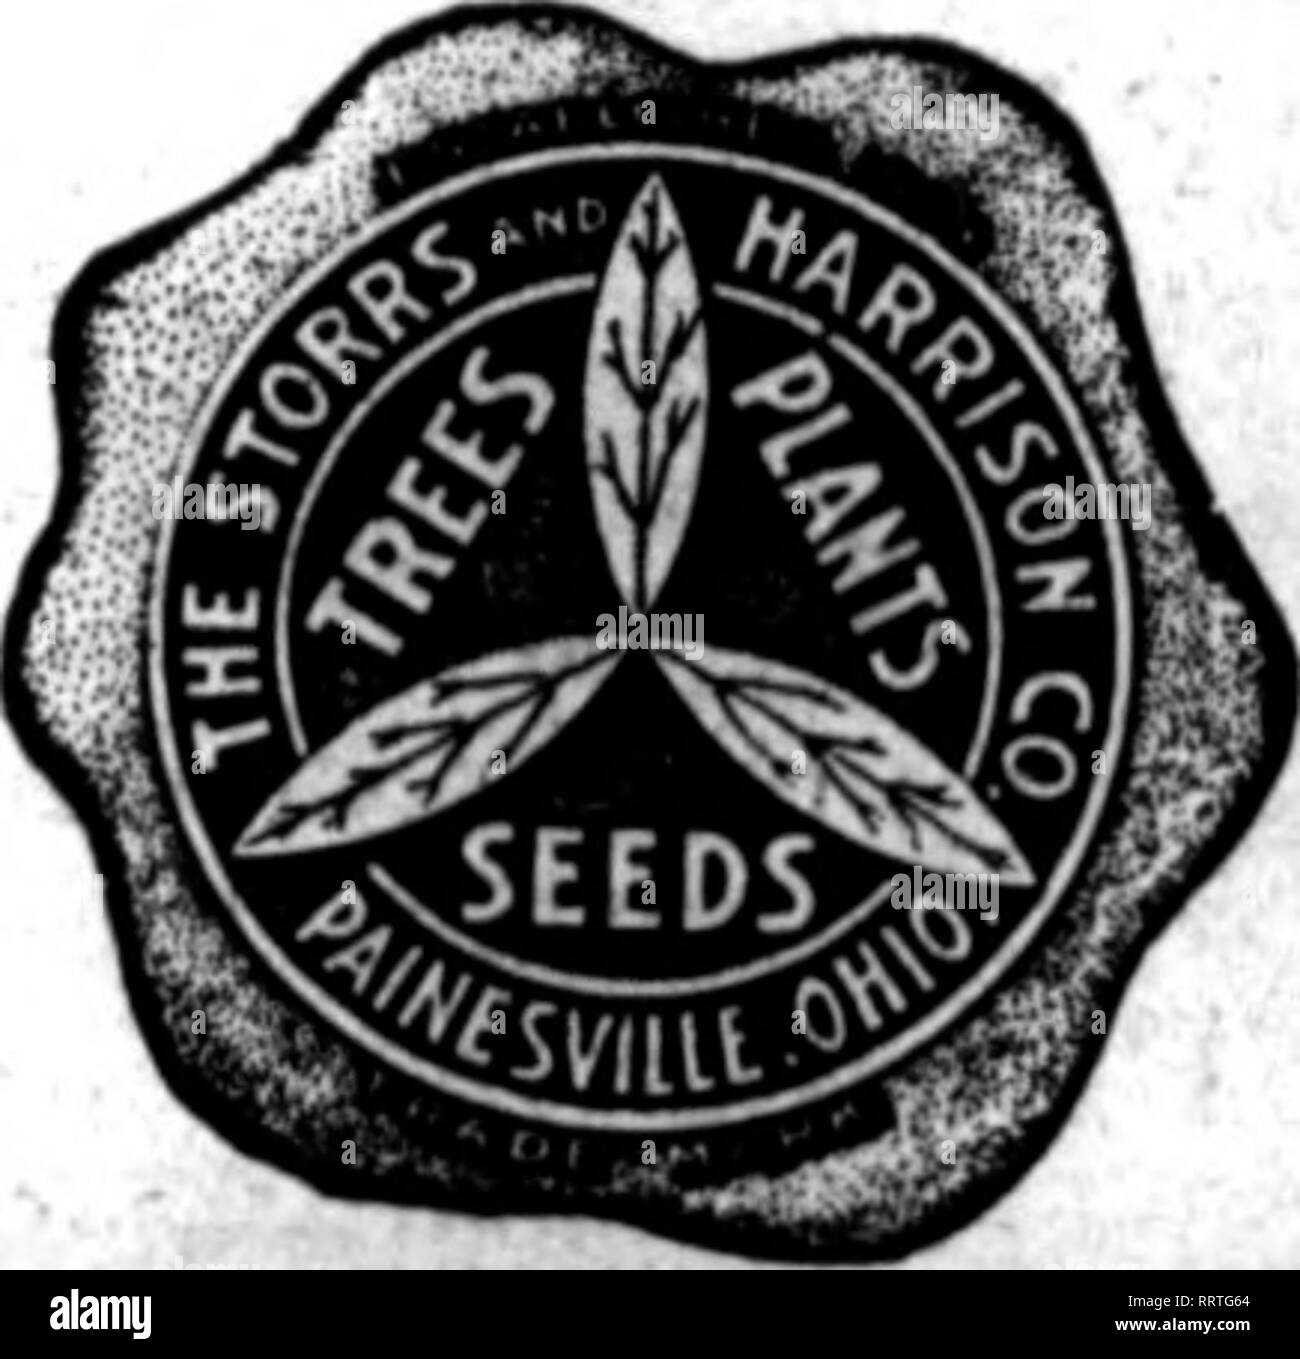 . Florists' review [microform]. Floriculture. &quot;Superb Quality&quot; SEEDS FOR FLORISTS = THE STORRS &amp; HARRISON CO.'S SUPERB MIXTURE OF GIANT PANSY SEED Contalas the Ultimate In Oiant Psnsies. You cannot buy a better mixture of Pansy Seed at any price. Trade Packet, 50c; ^ oz., $1.25; oz.. |4.00.. We carry in stock all named and separate colors of Oiant Pansies, also the best strains of Odier, Gassier, Butrnot, Trimardeau. etc. (See our trade list for prices.) Cineraria Grandiflora ^»rn)?tlrdVpa'^k.t/$i!oo Bellis Perennis (English Daisy) Lonarfellow (red). Snowball (white), Tr. Pkt., 3 Stock Photo